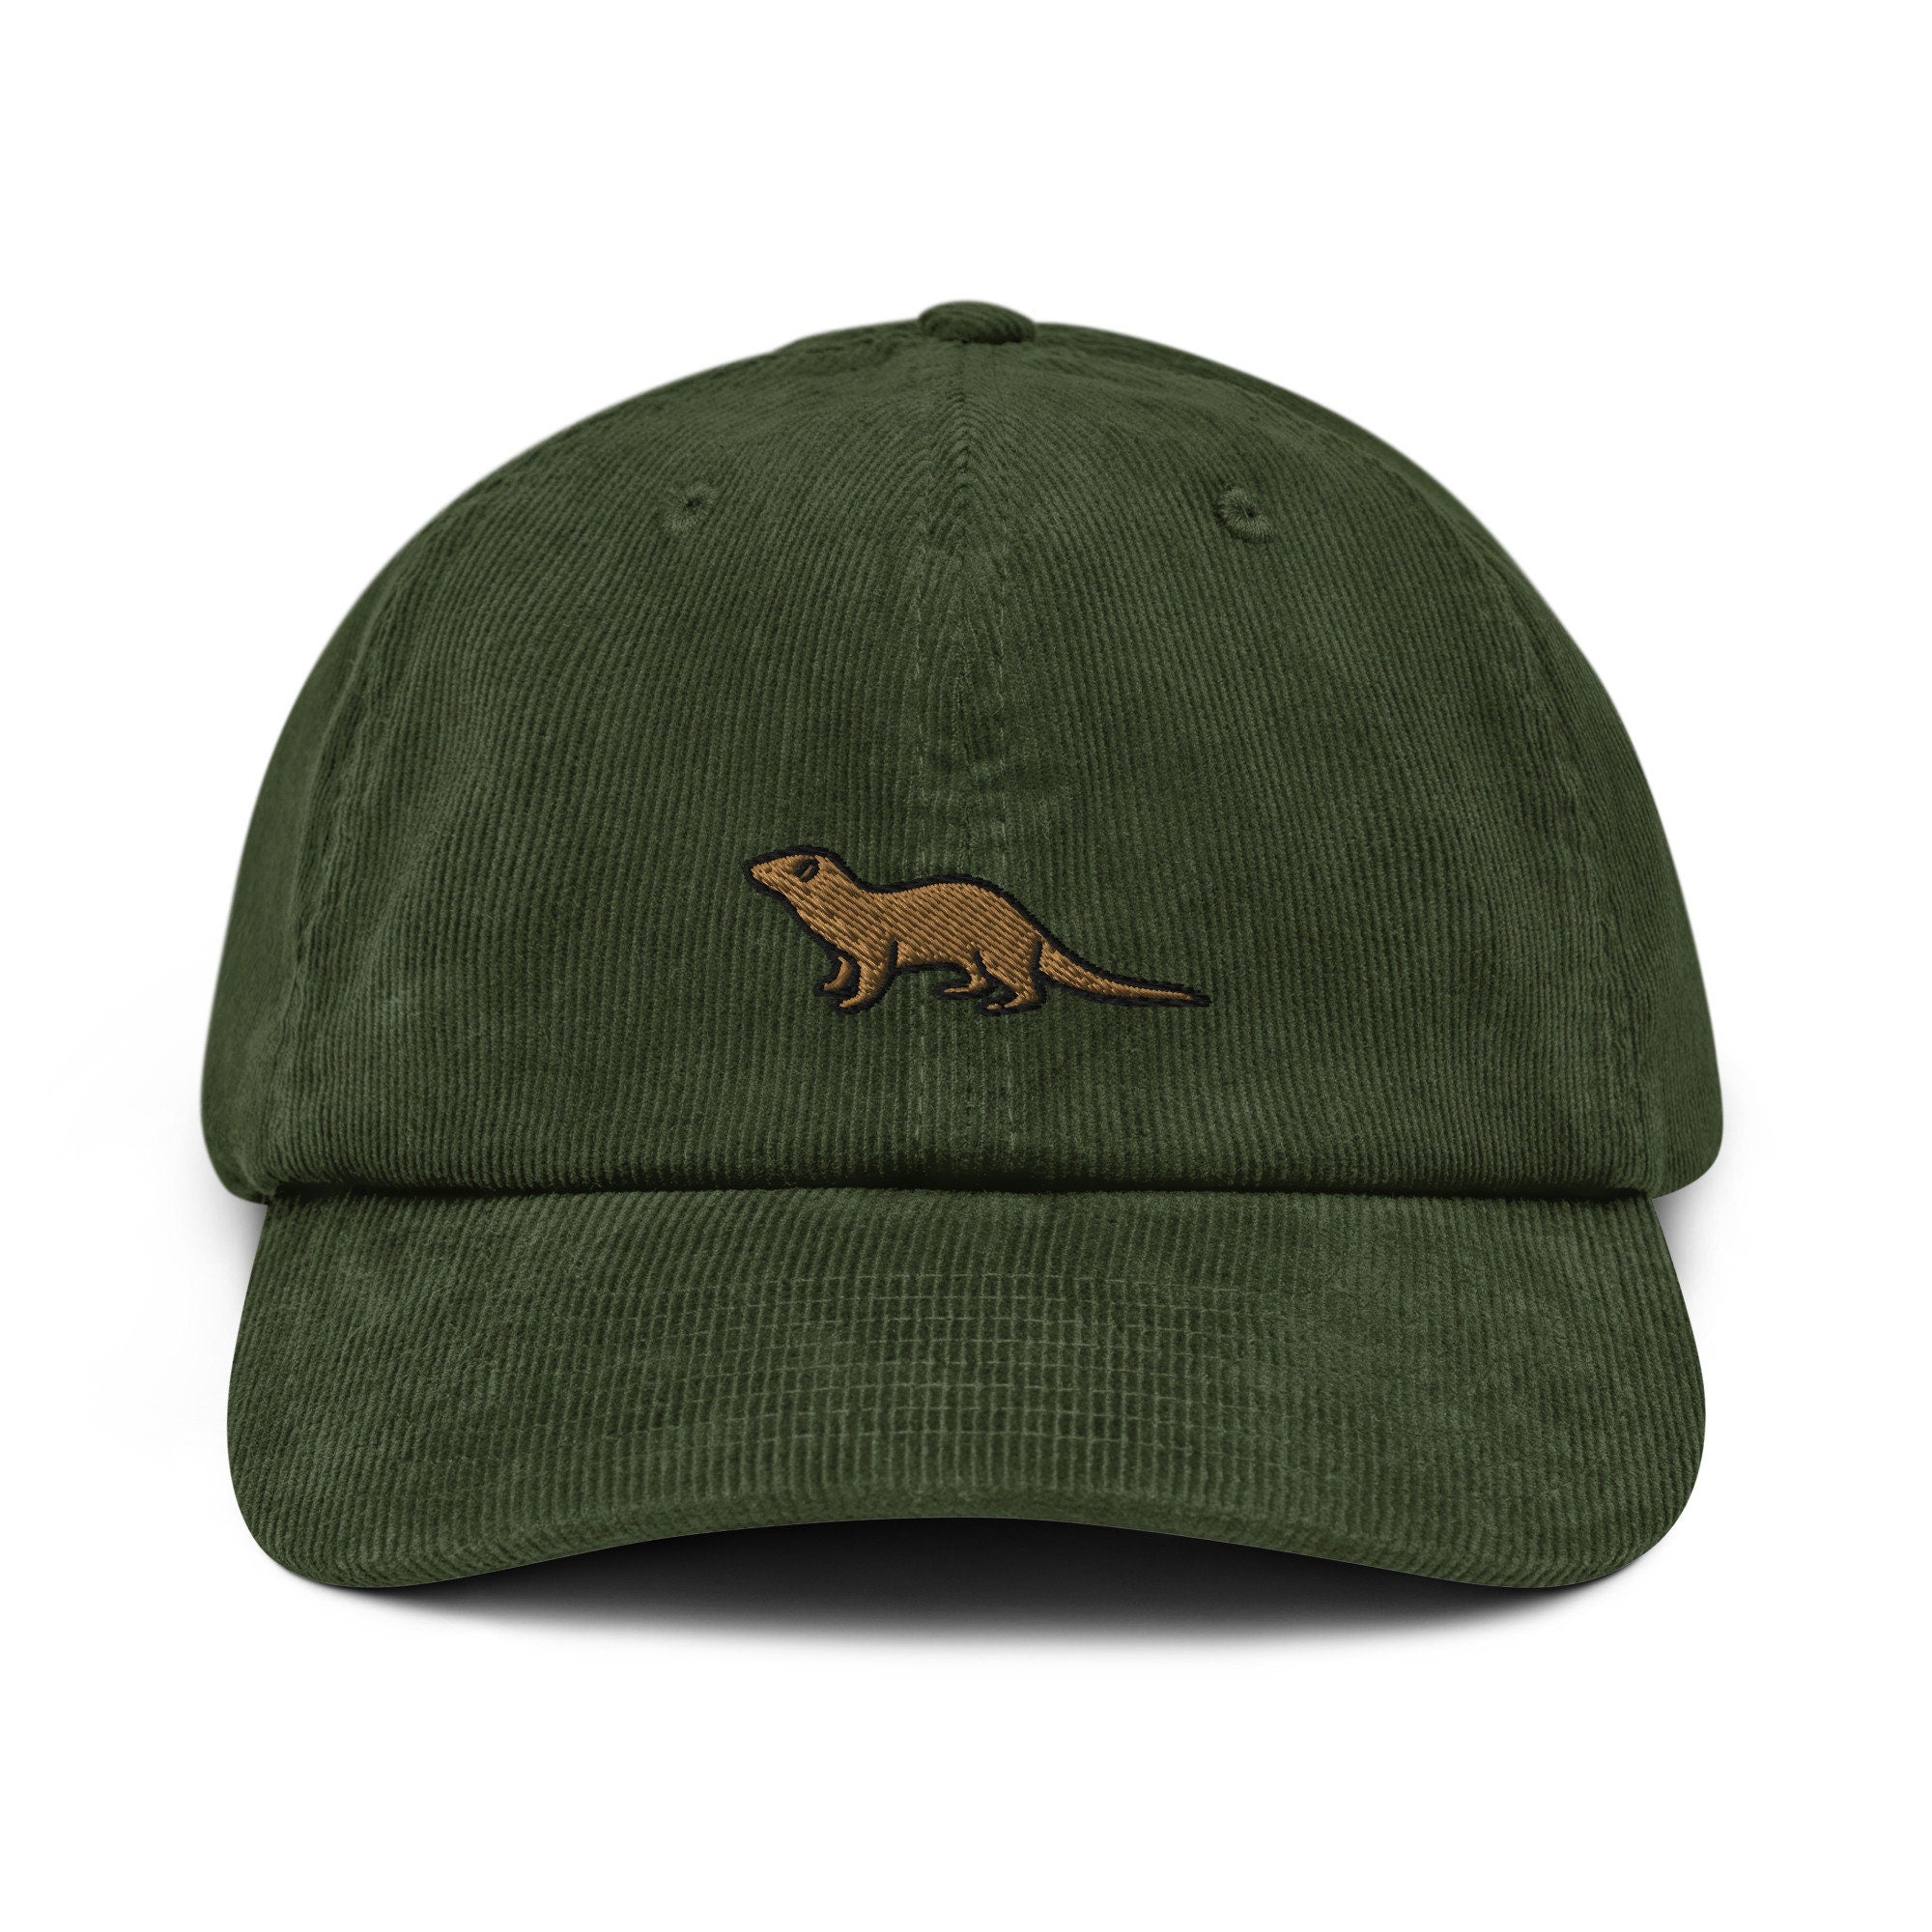 Otter Corduroy Hat, Handmade Embroidered Corduroy Dad Cap - Multiple Colors